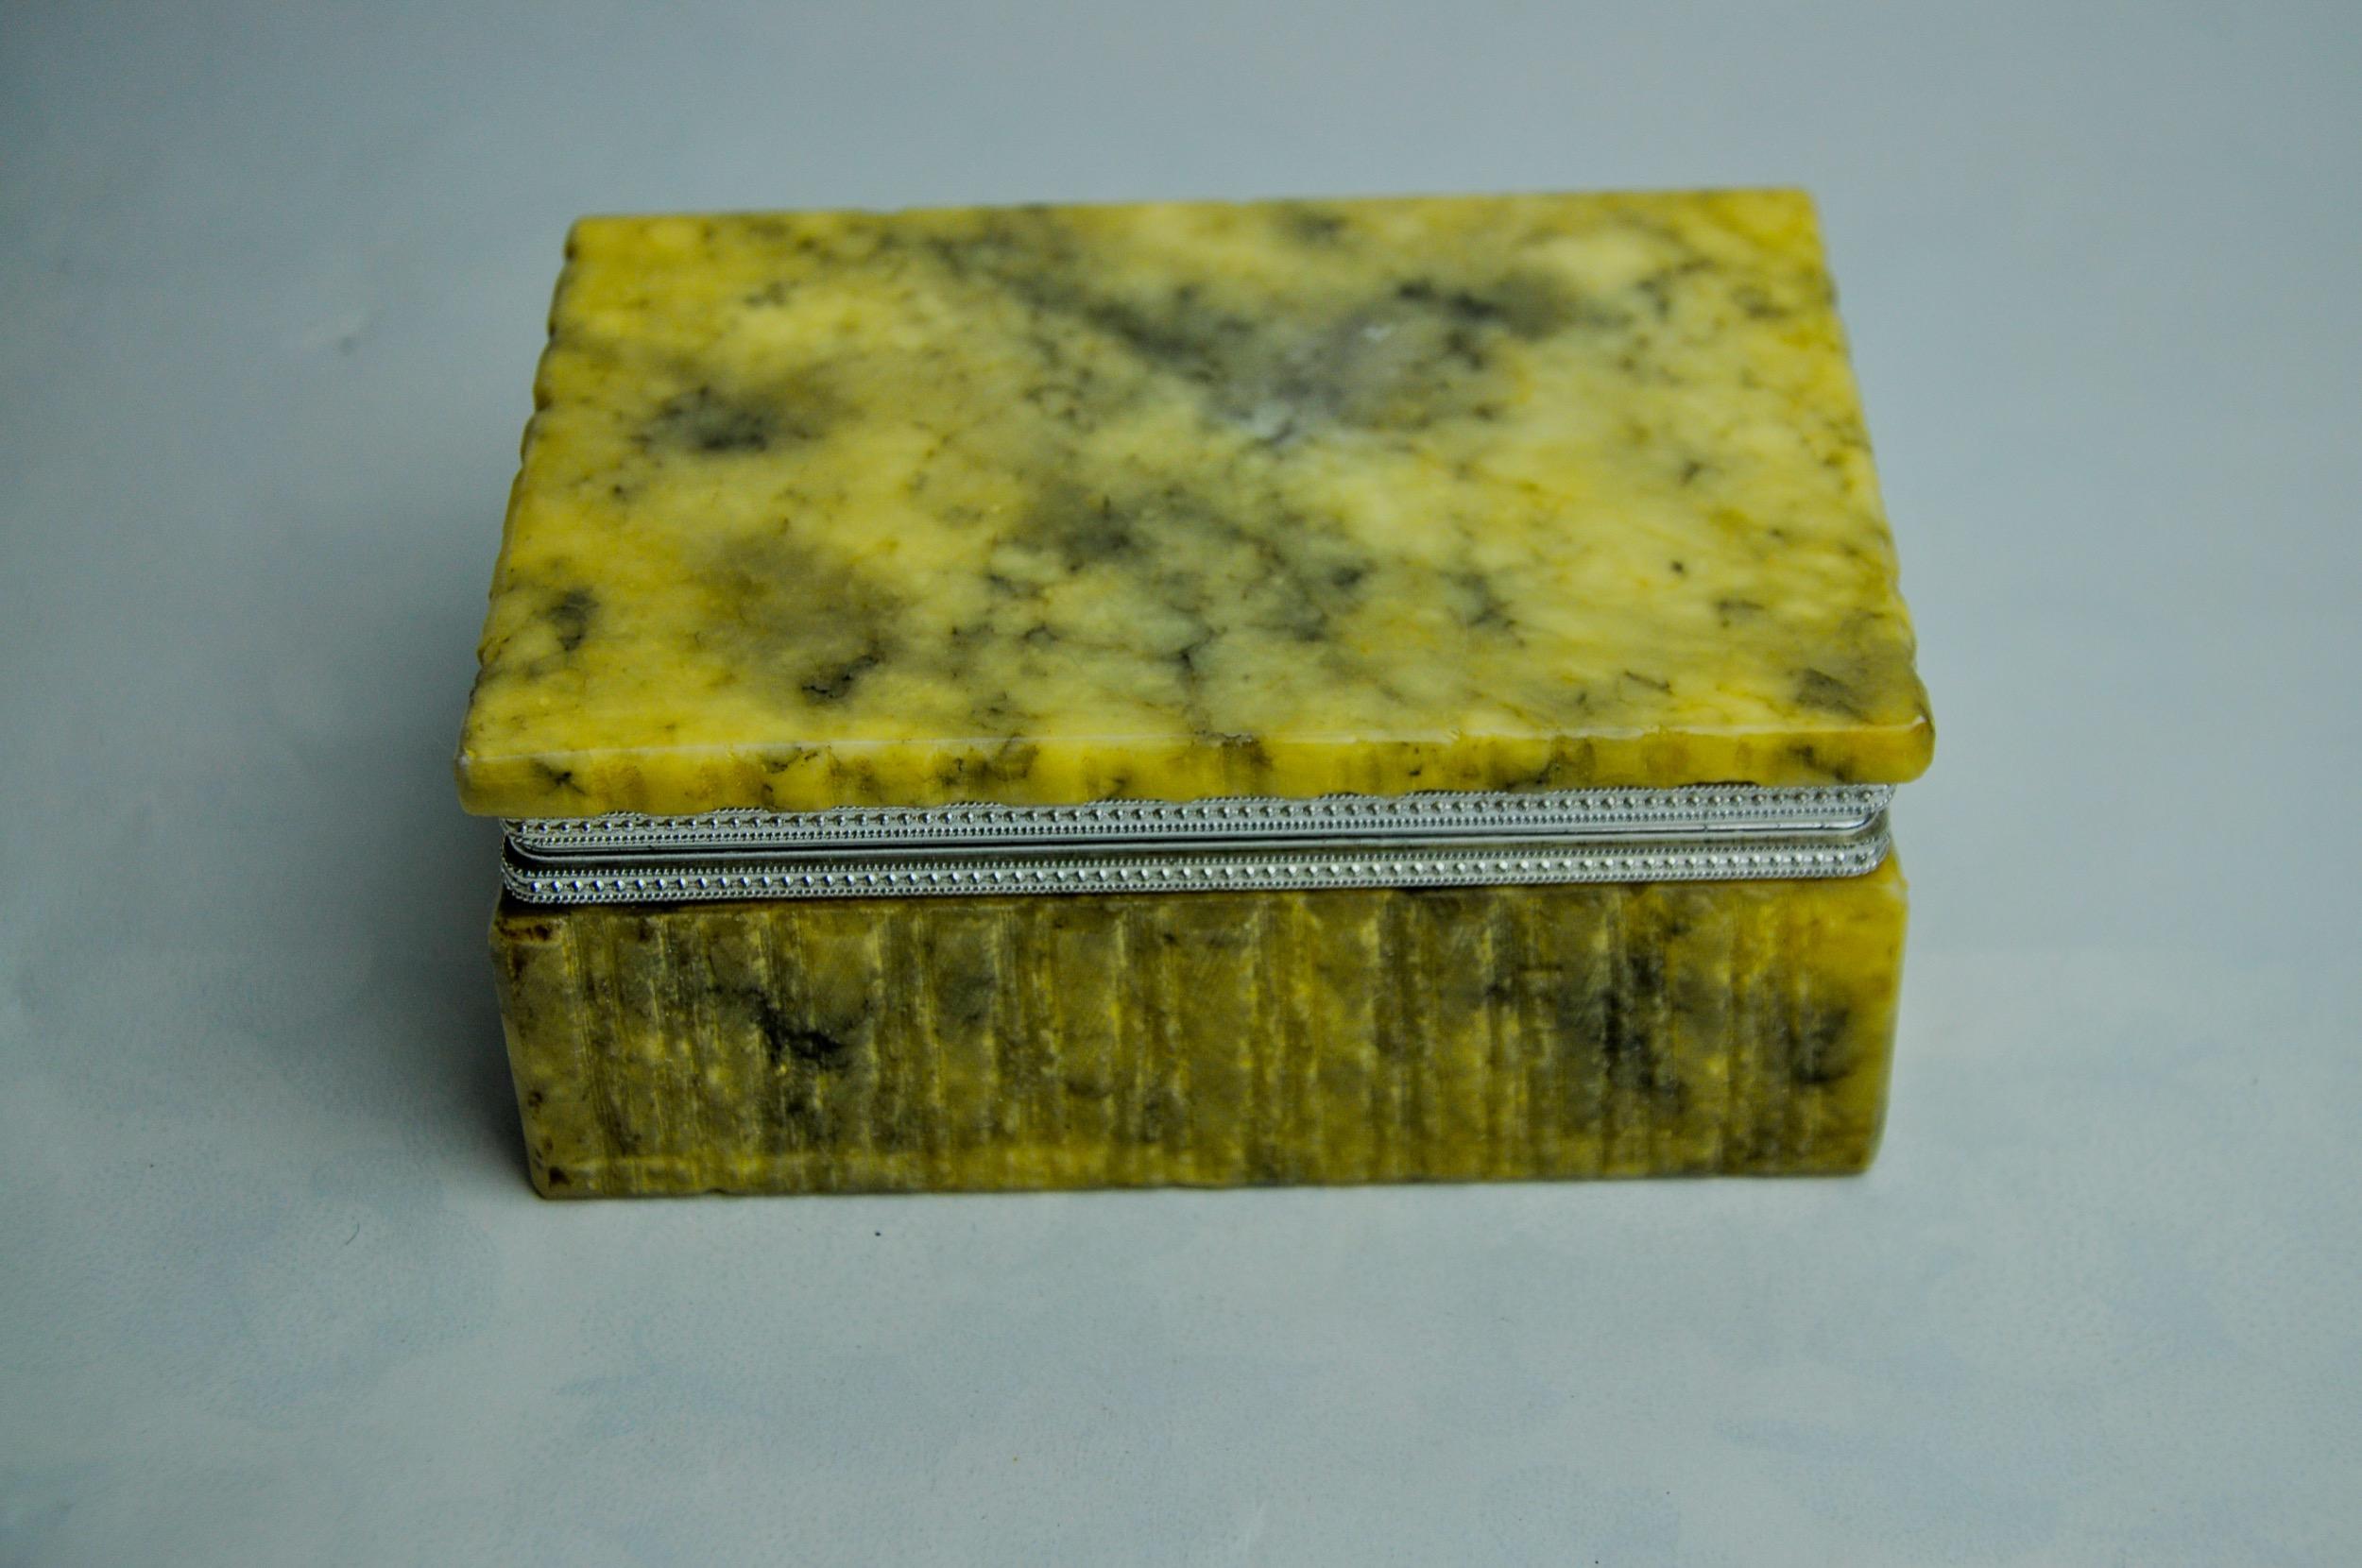 Stunning yellow alabaster box designed and produced by romano bianchi in Italy in the 1970s. Handcrafted yellow alabaster box and chromed metal structure. Decorative object that will bring a real design touch to your interior. Very nice patina. Ref: